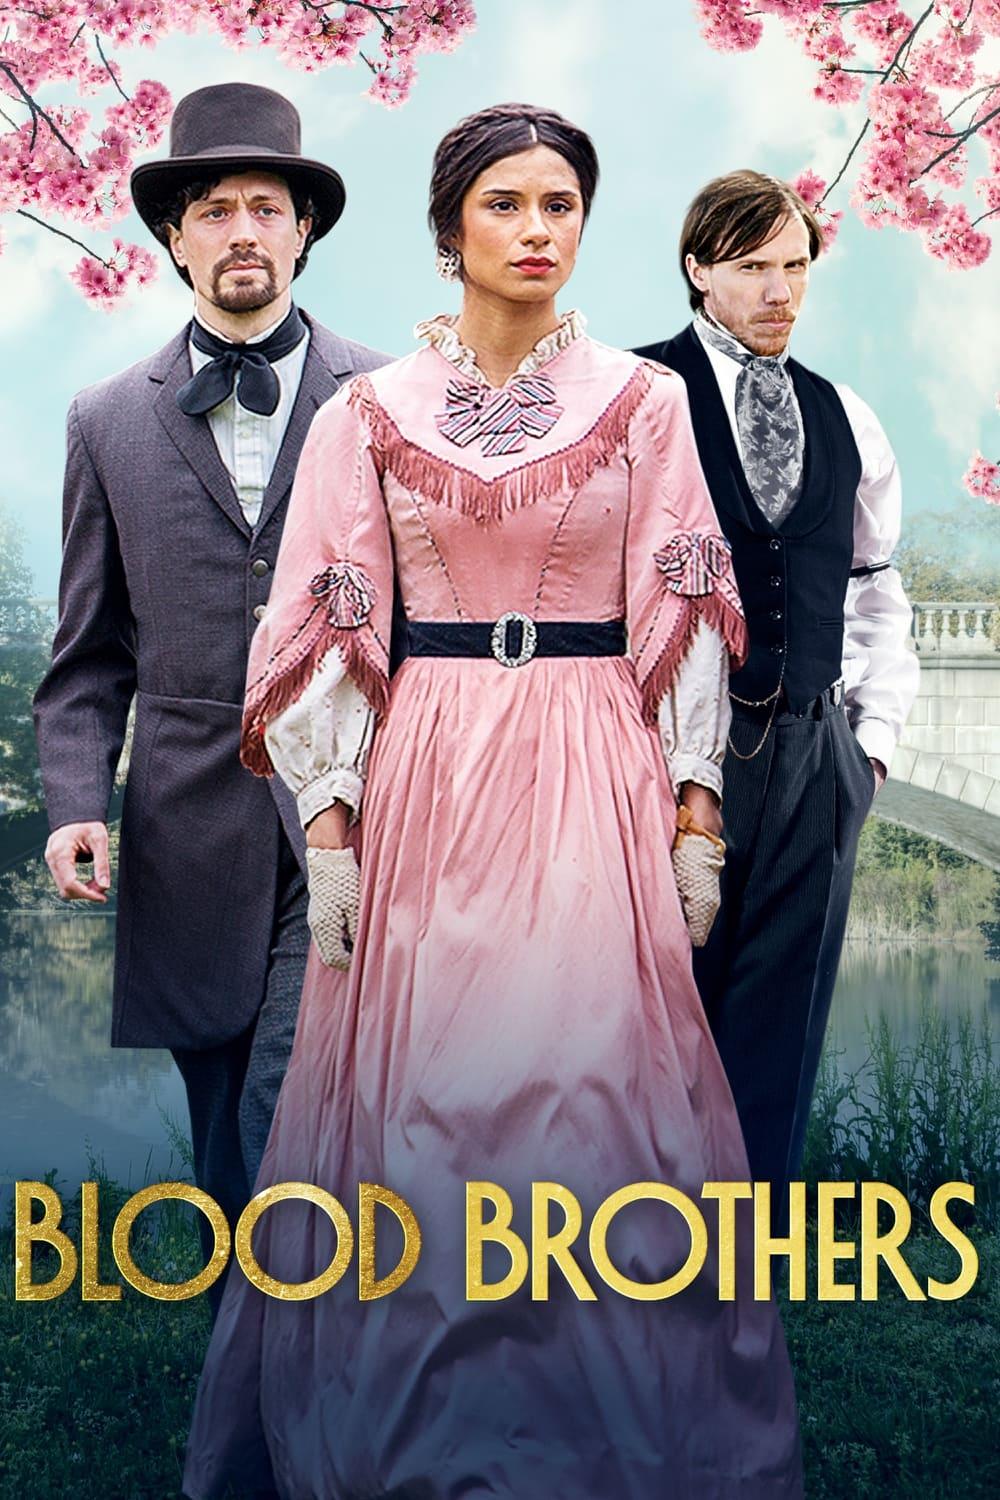 Blood Brothers poster